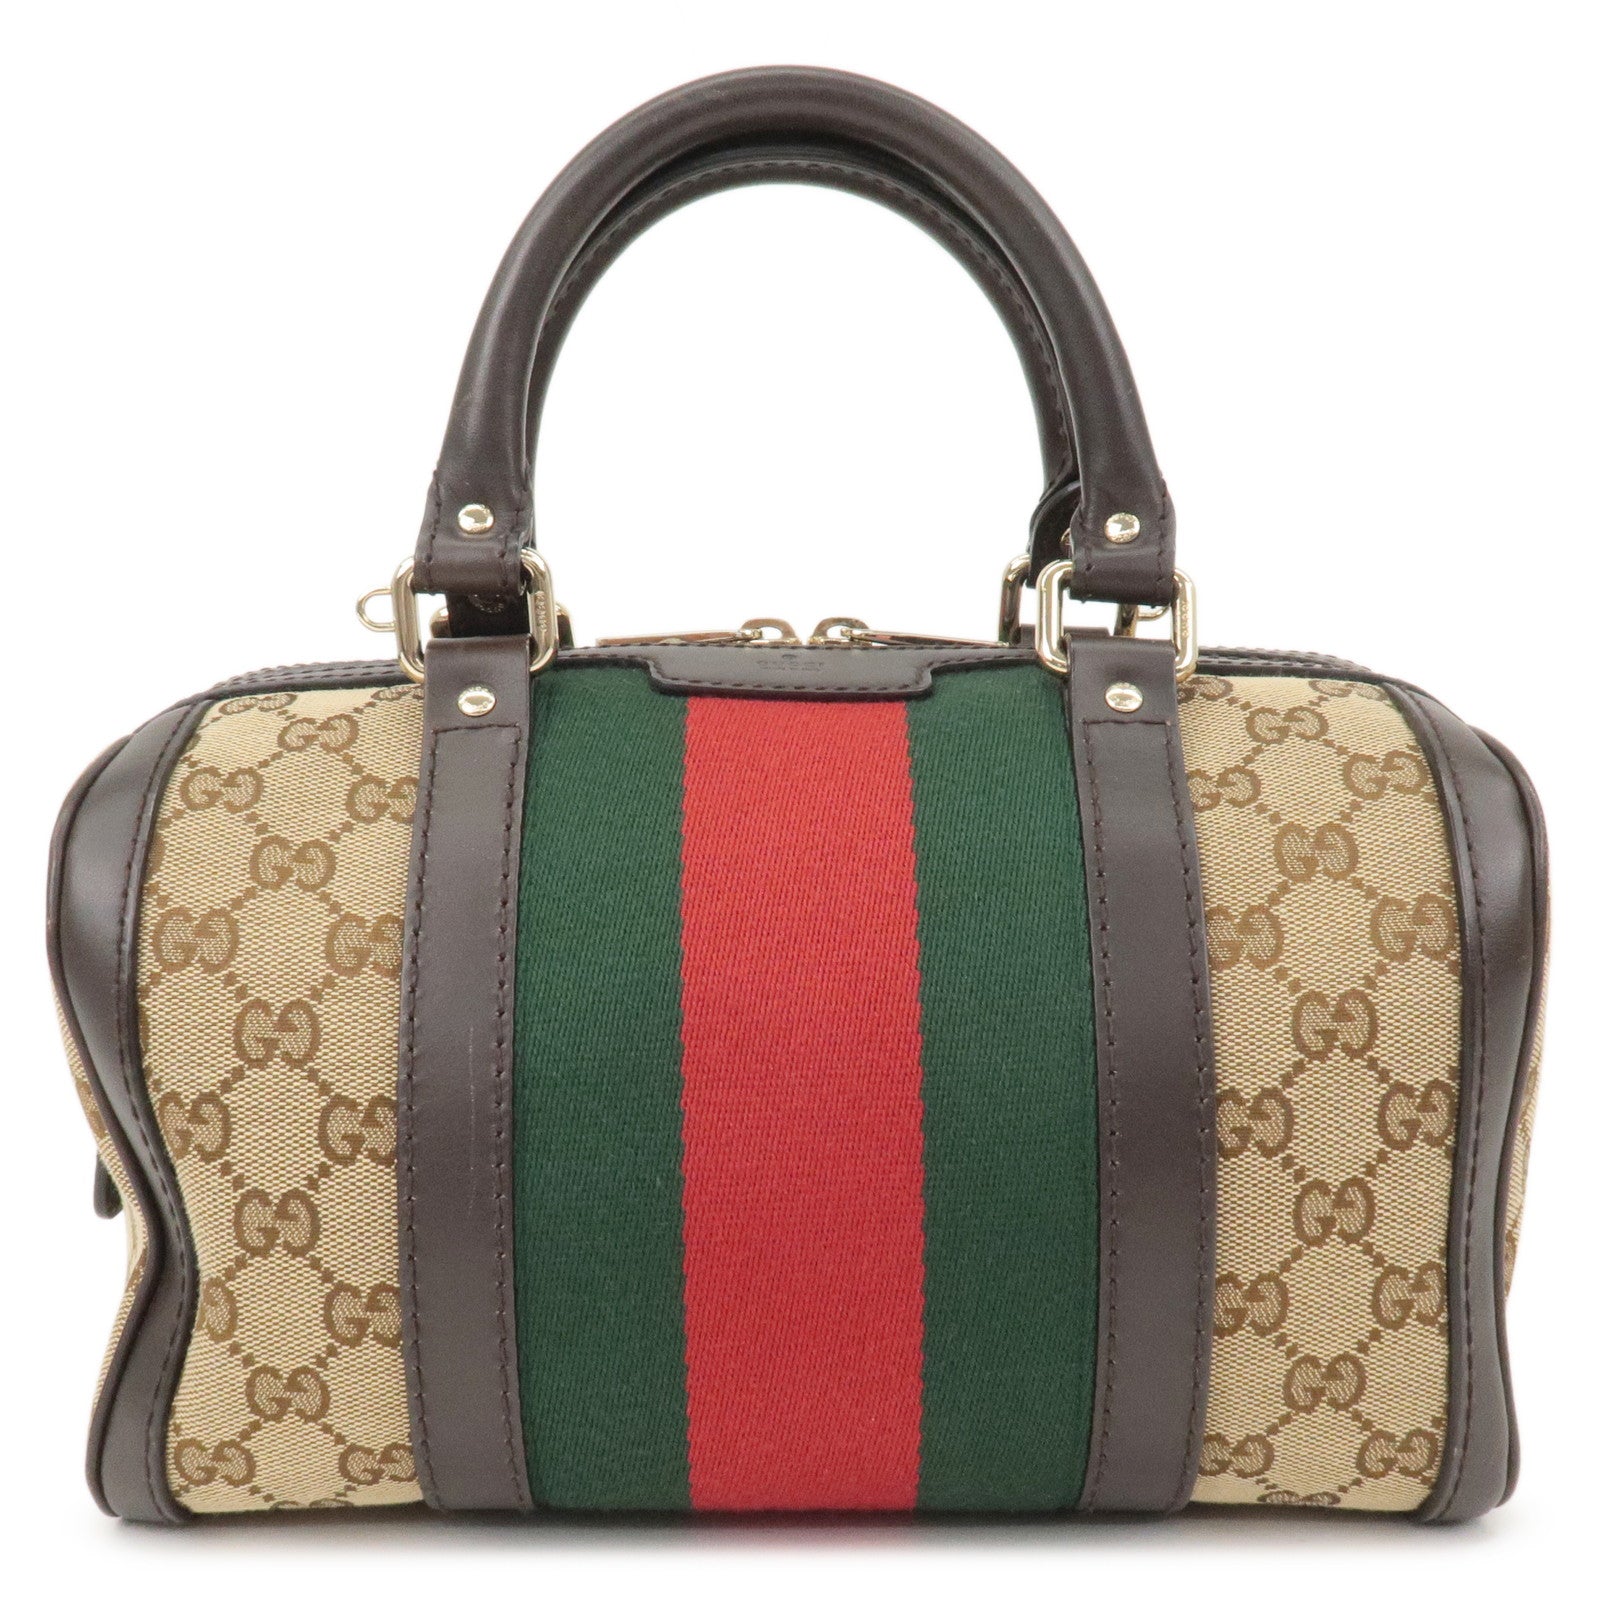 GUCCI-Sherry-GG-Canvas-Line-Leather-2Way-Boston-Bag-Beige-269876